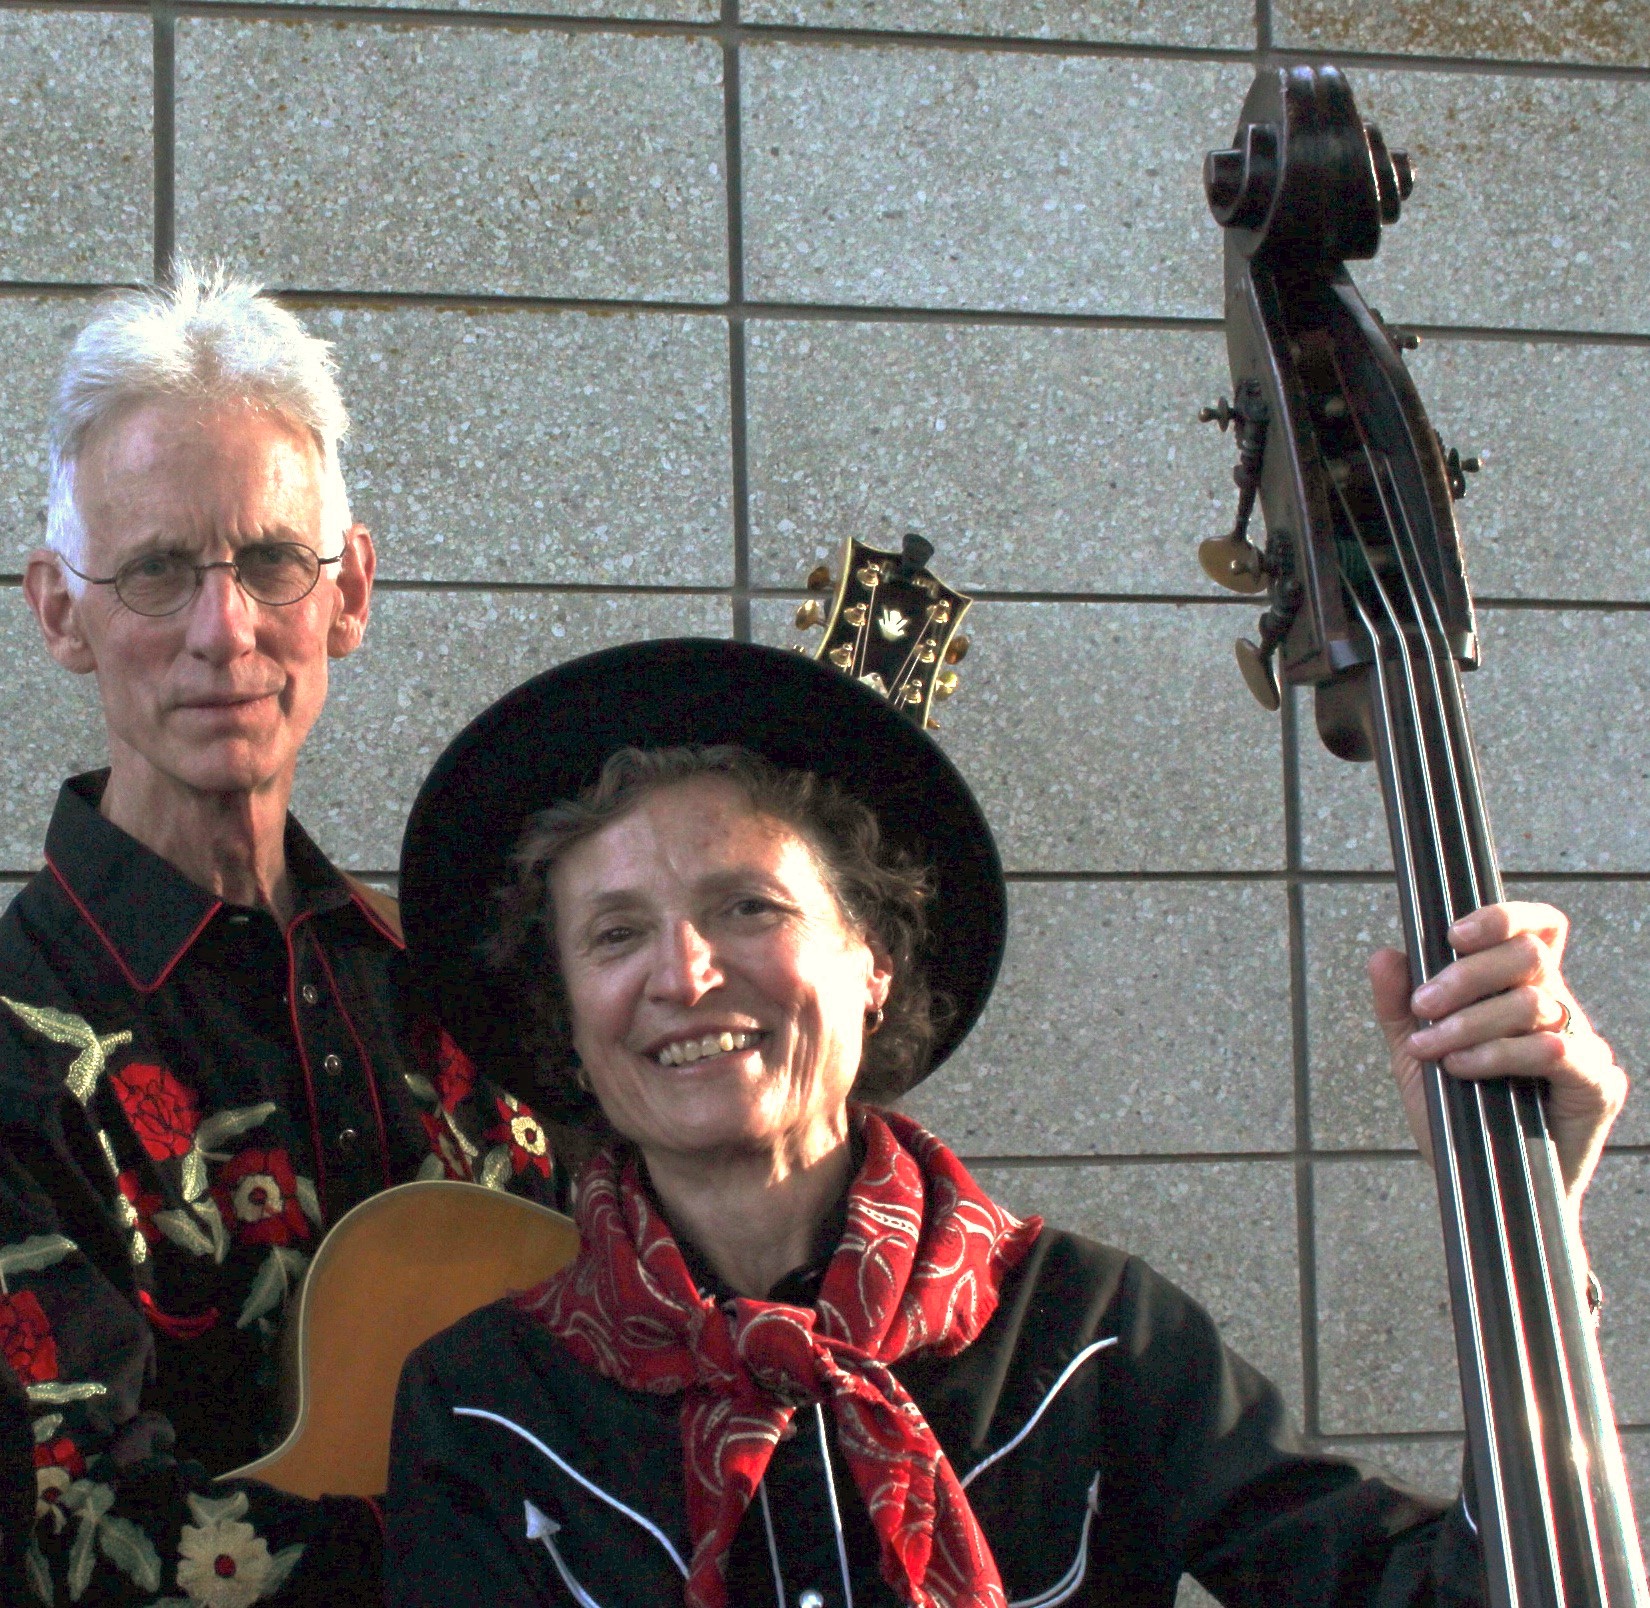 downundermutts man and woman dressd in cowboy shirts. They hold a double bass and a vintage acoustic guitar